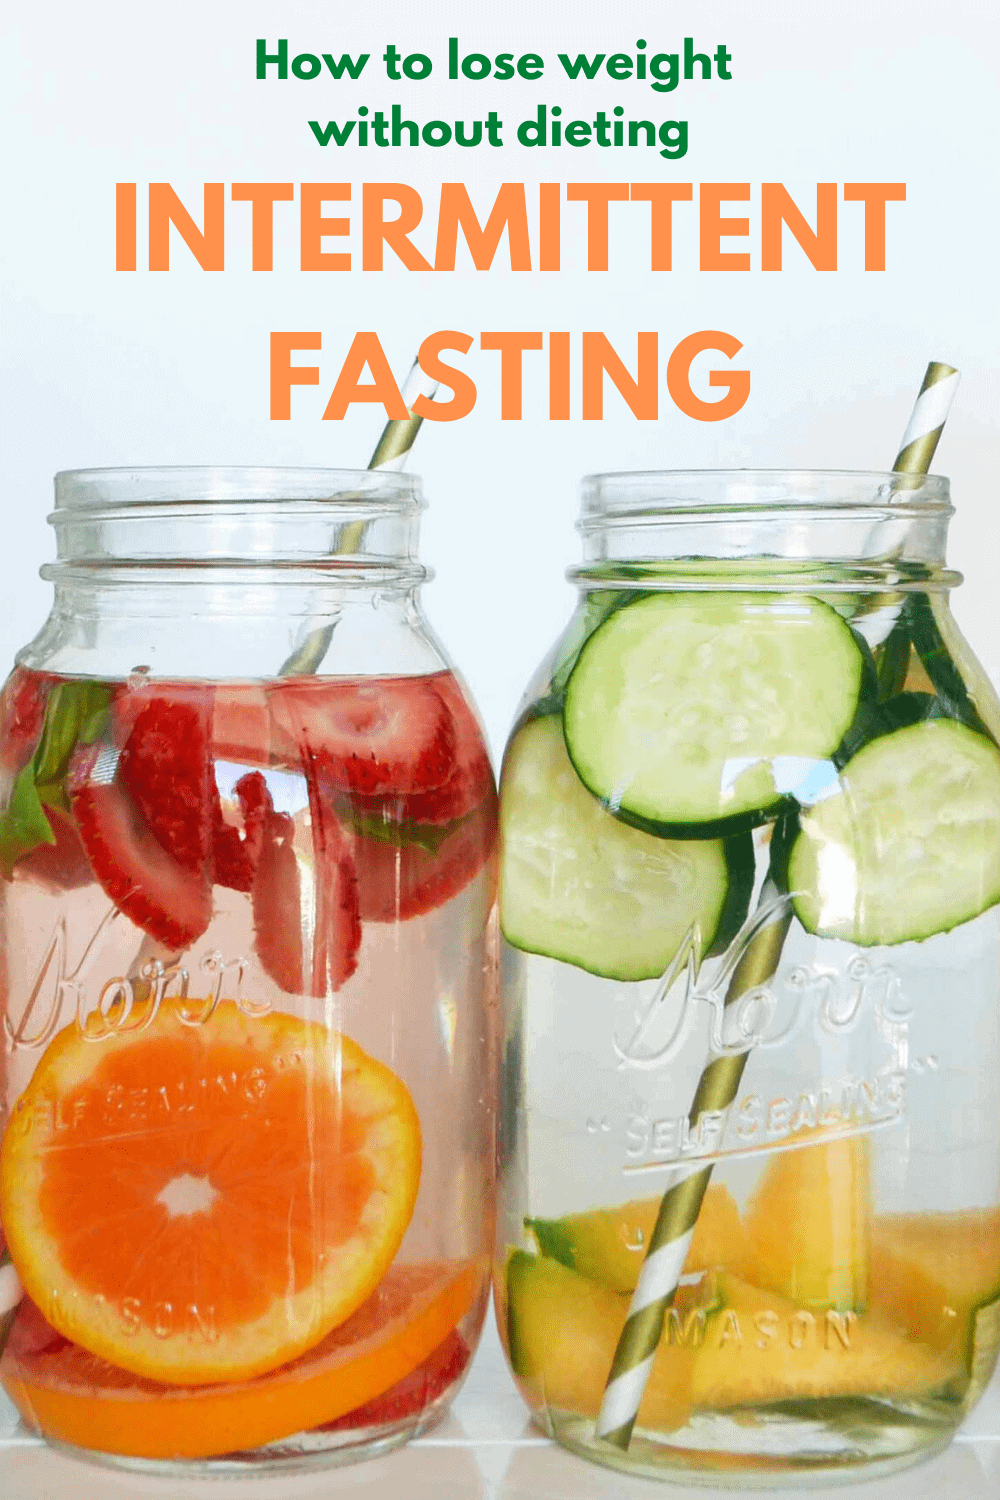 Intermittent Fasting Results. How I lost over 50 lbs. by following an intermittent fasting program. It is great for weight loss without dieting. #fasting #fast #intermittentfasting #beforeandafter #diet